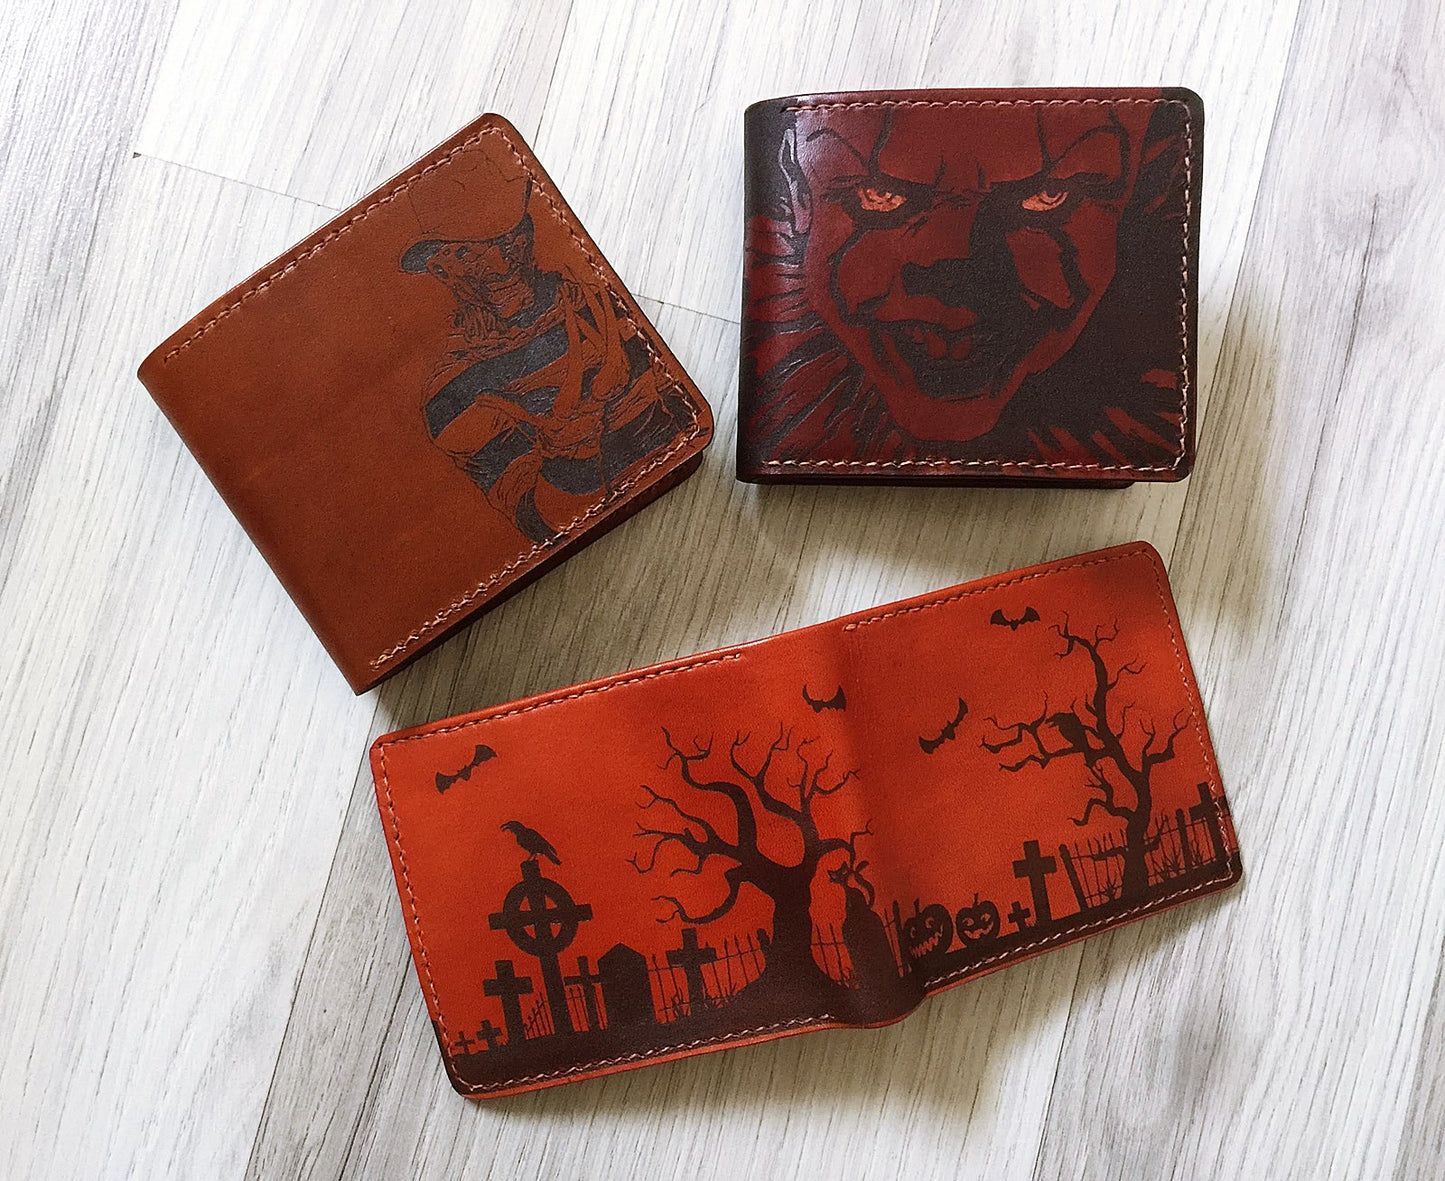 Mayan Corner - Pennywise IT halloween horror leather handmade men's wallet, horror movie men's present, personalized horror gifts for him, father, husband